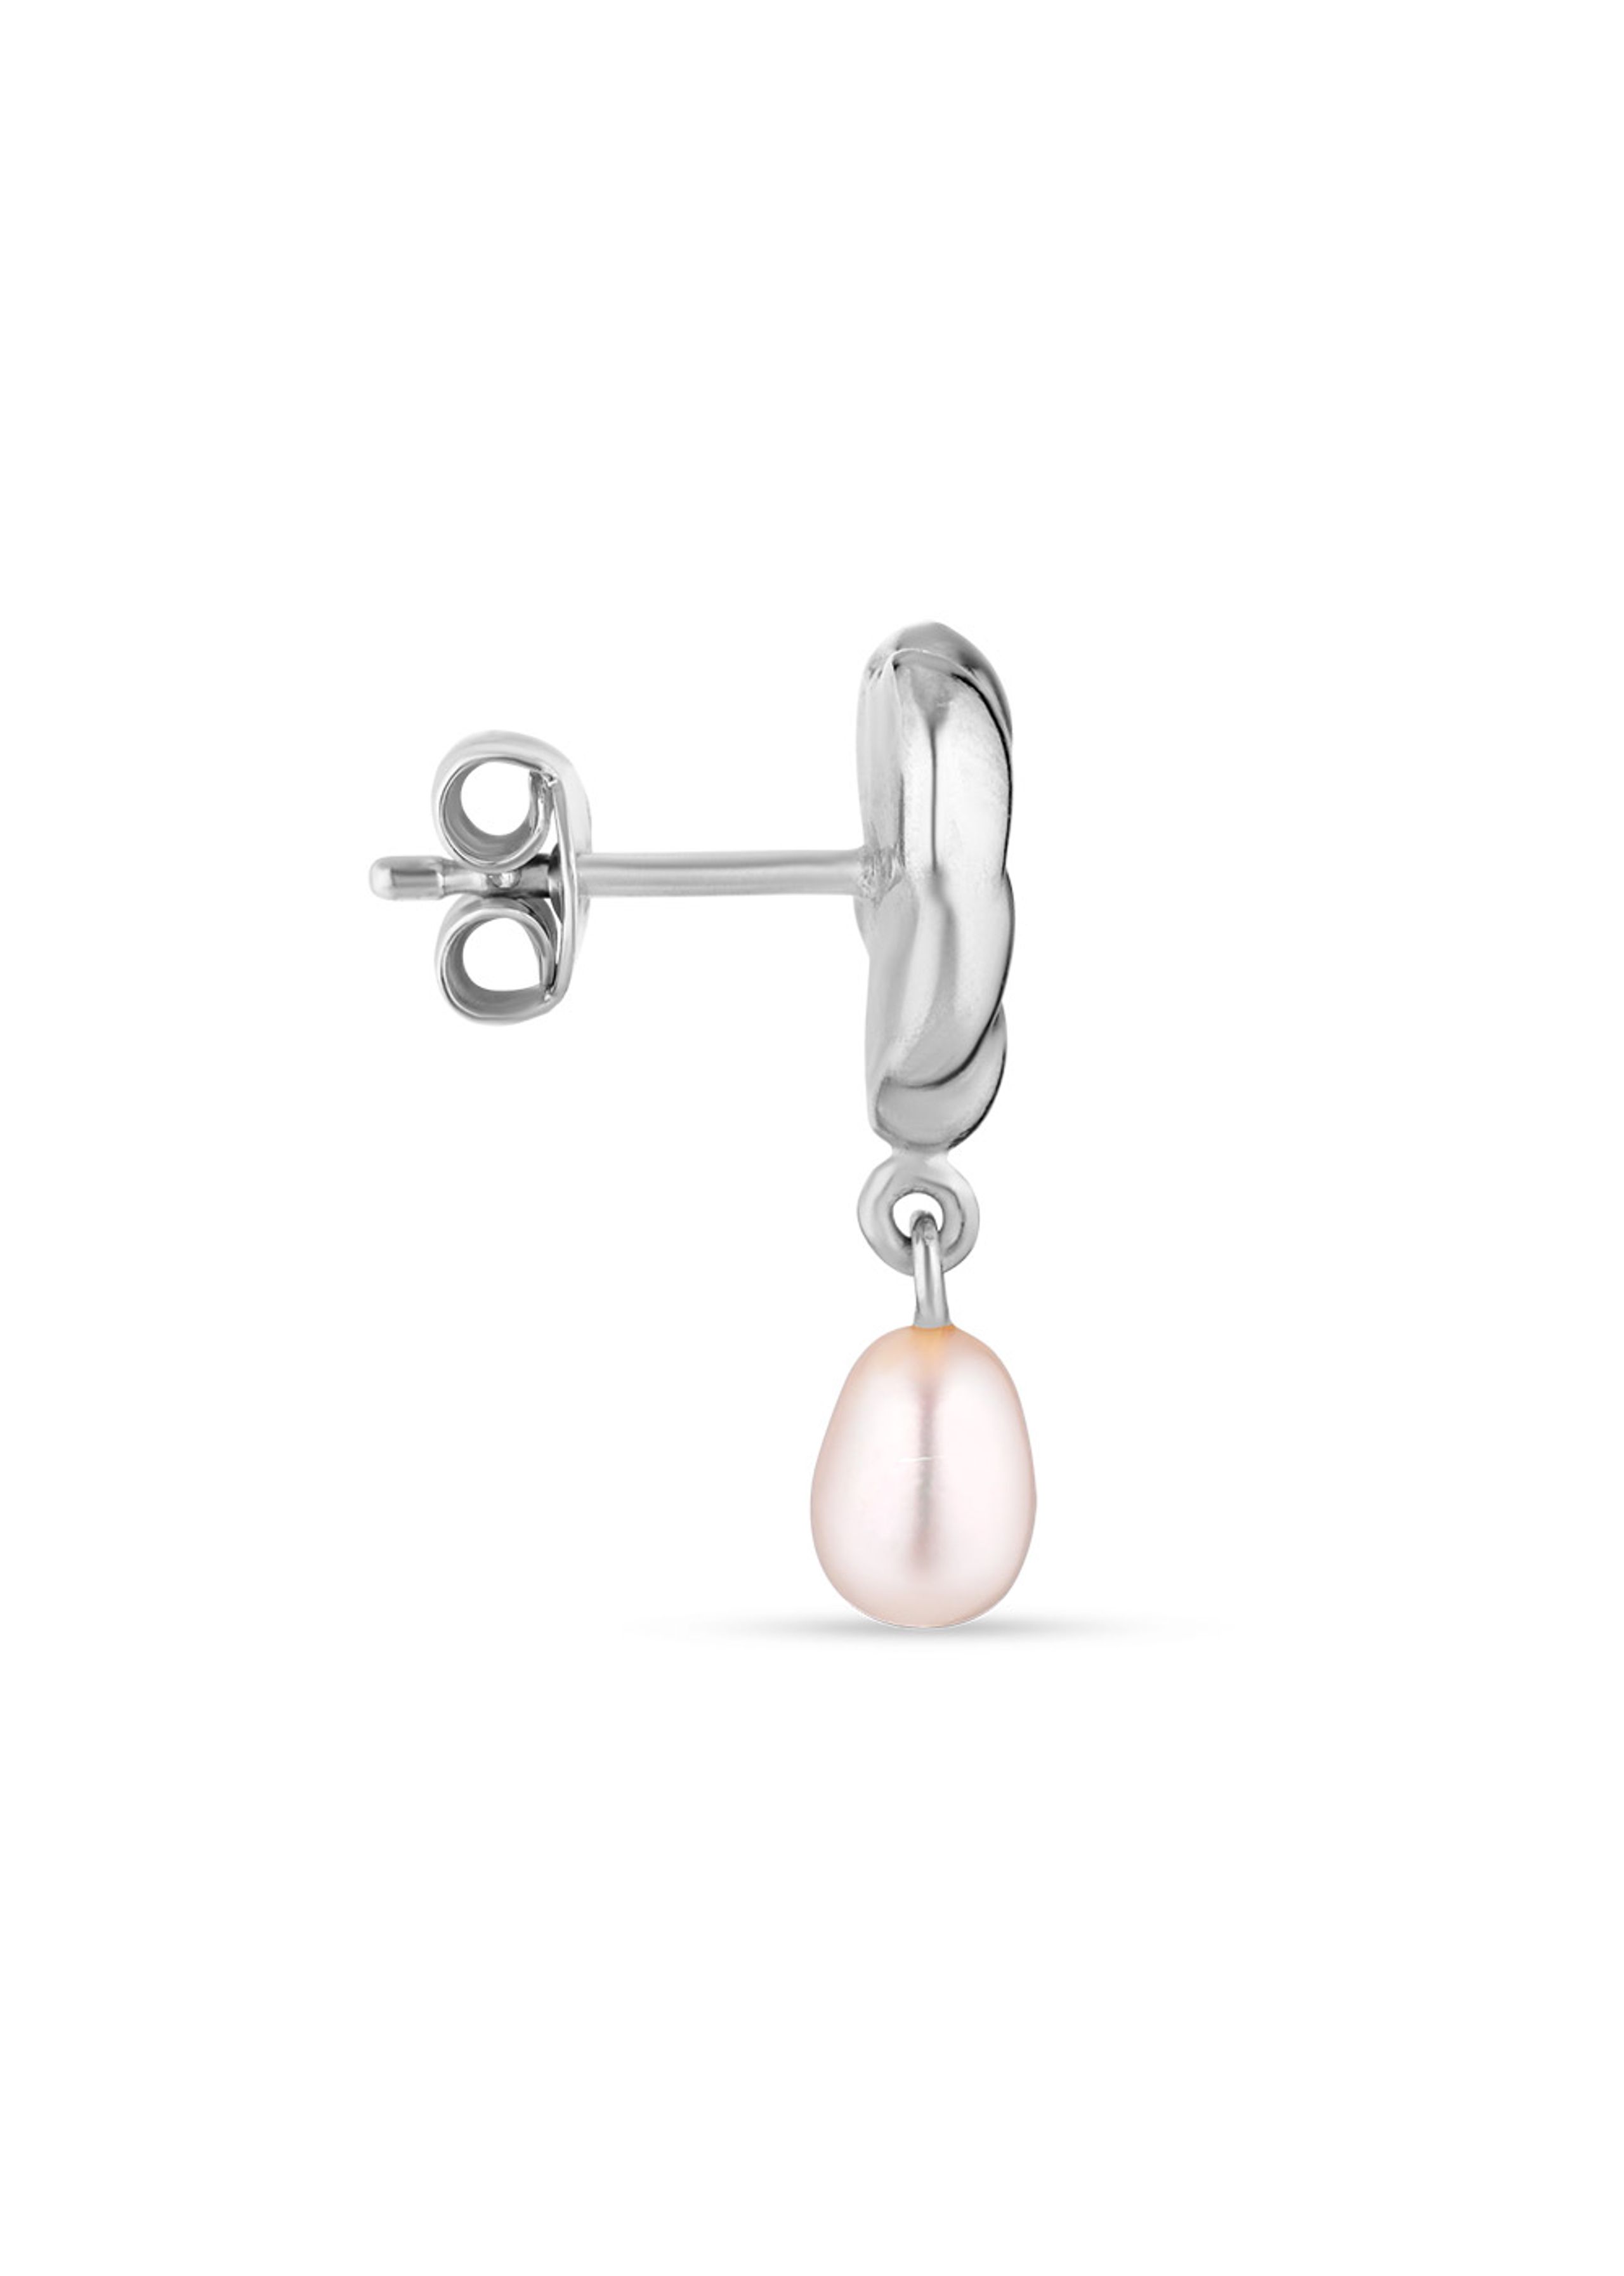 Jane Kønig - Boucle d'oreille - Drippy Earstud with Pearl Pendant - Silver